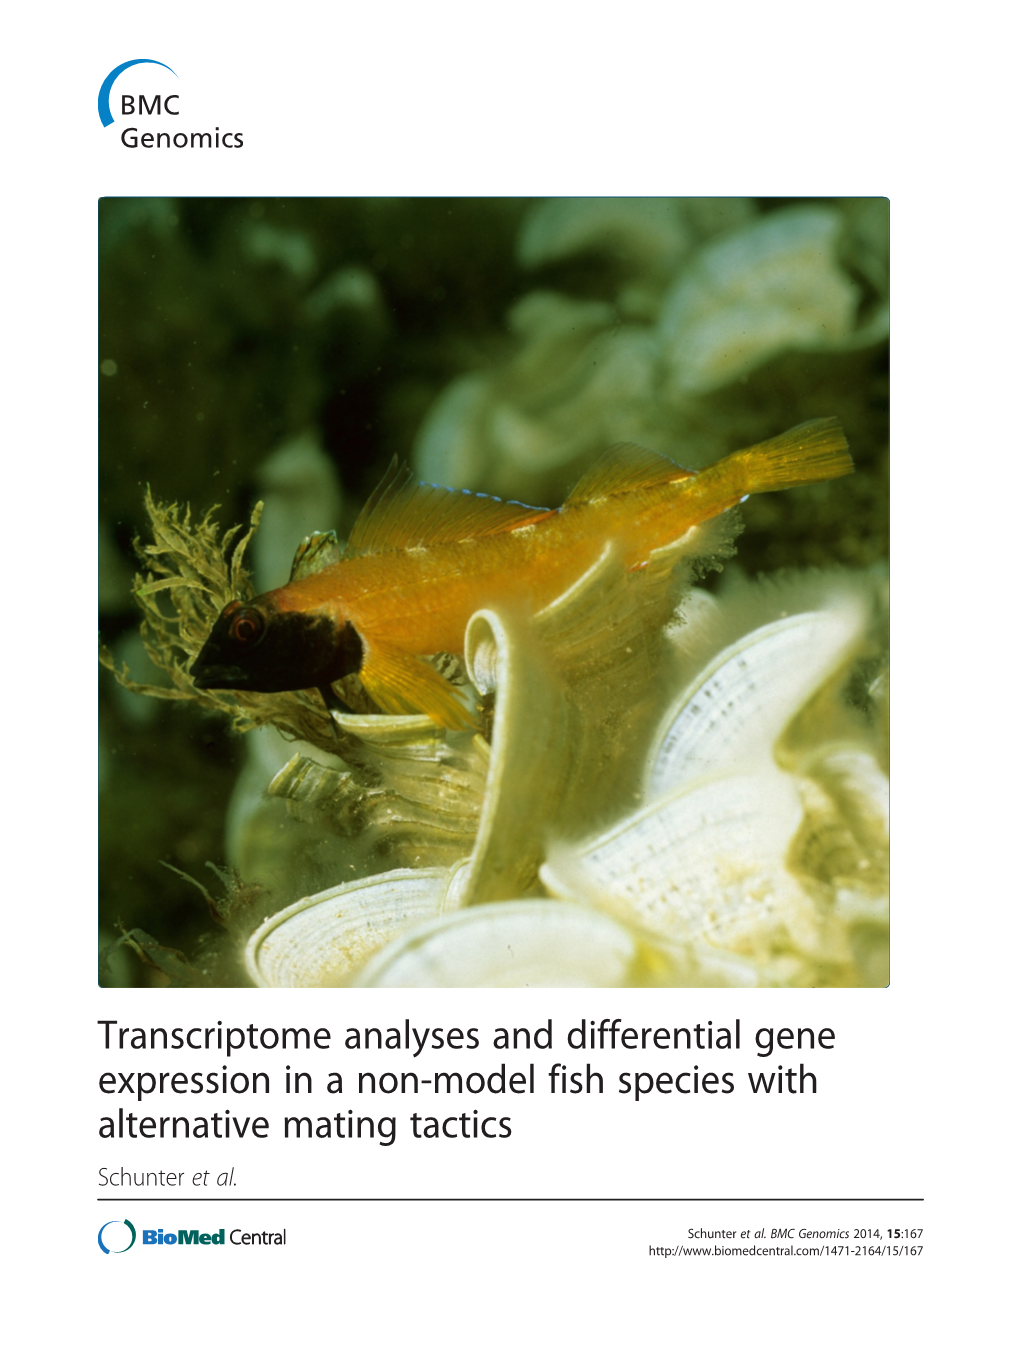 Transcriptome Analyses and Differential Gene Expression in a Non-Model Fish Species with Alternative Mating Tactics Schunter Et Al